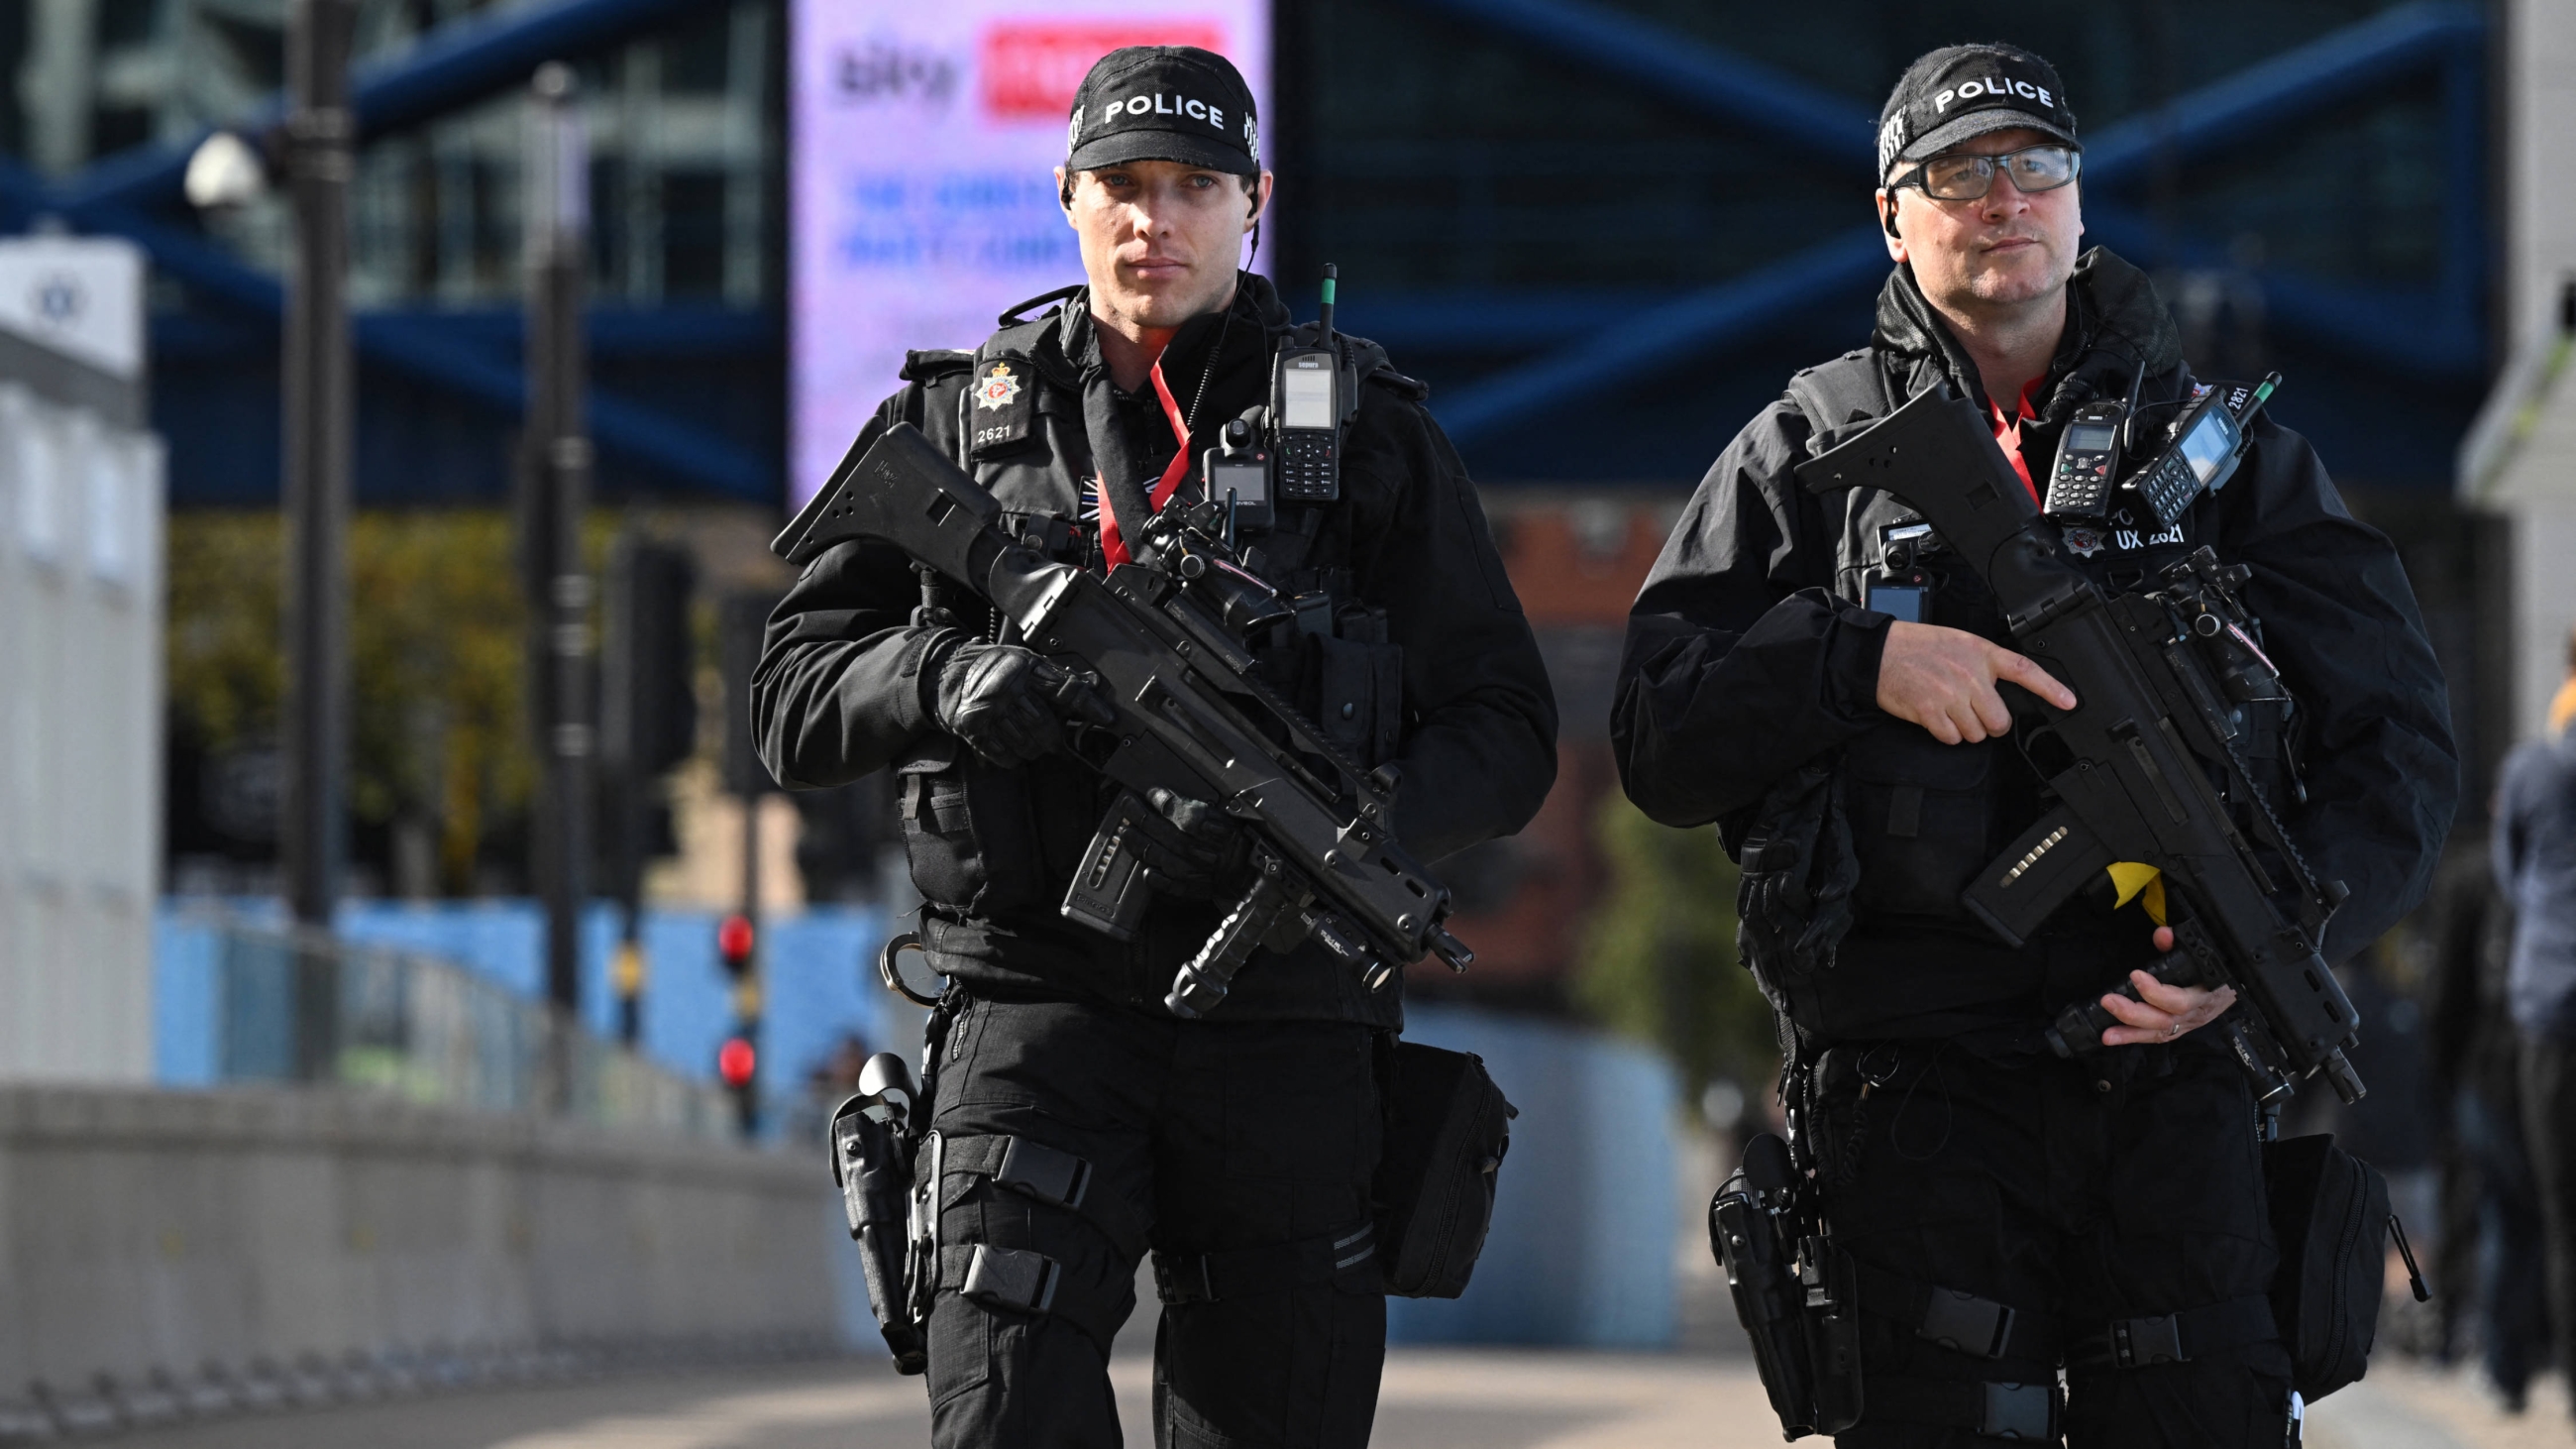 Armed police patrol outside the venue on the opening day of the annual Conservative Party Conference in Birmingham, central England, on 2 October 2022 (AFP)